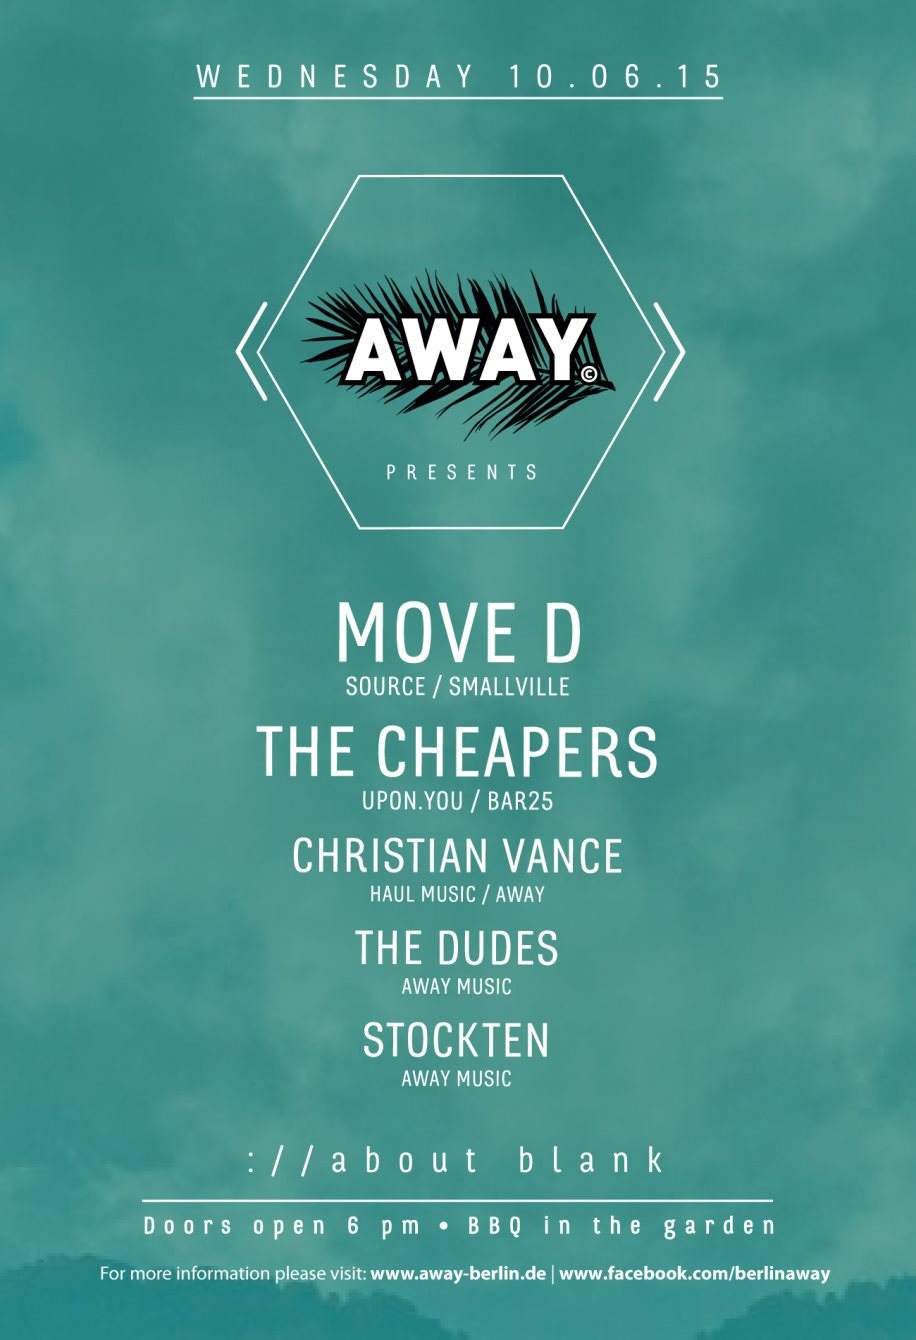 Away presents Move D & The Cheapers - Página trasera